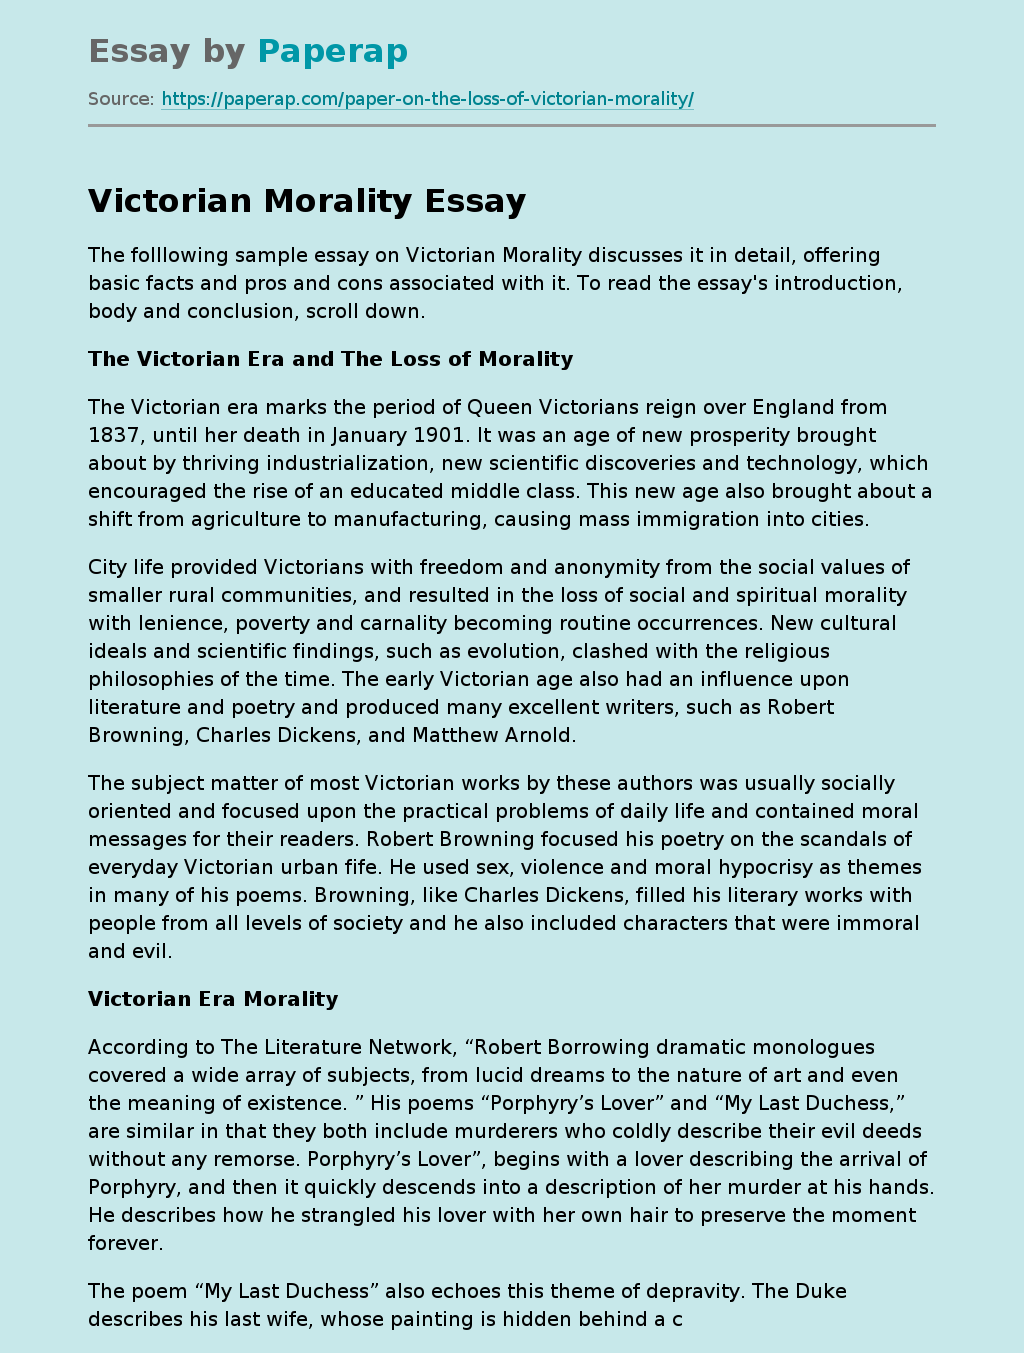 The Victorian Era and The Loss of Morality